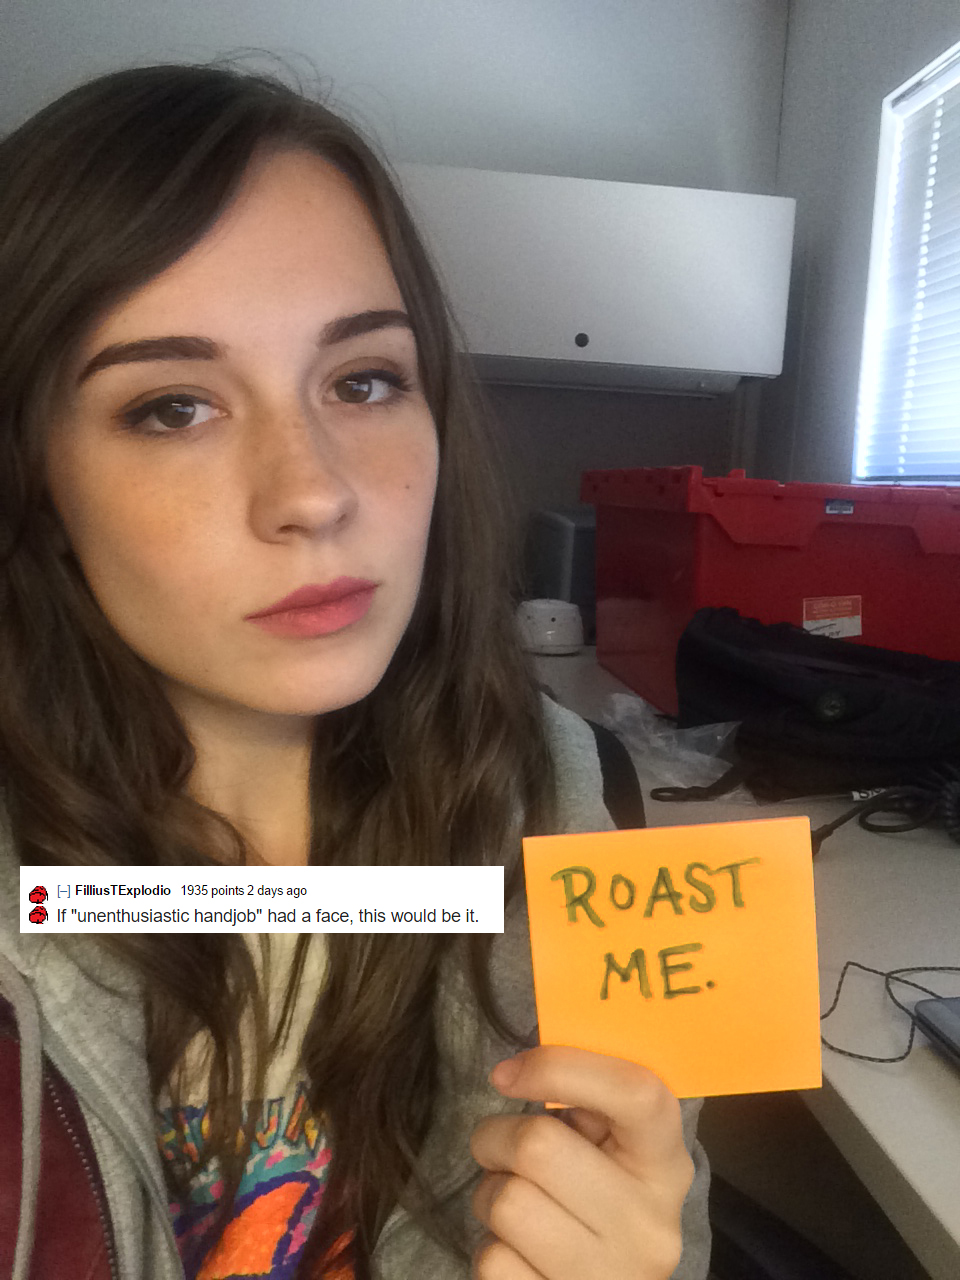 roast me handjob - Explodio 70 point de or unenthusiastic handjob had a face, this would be Roast Me